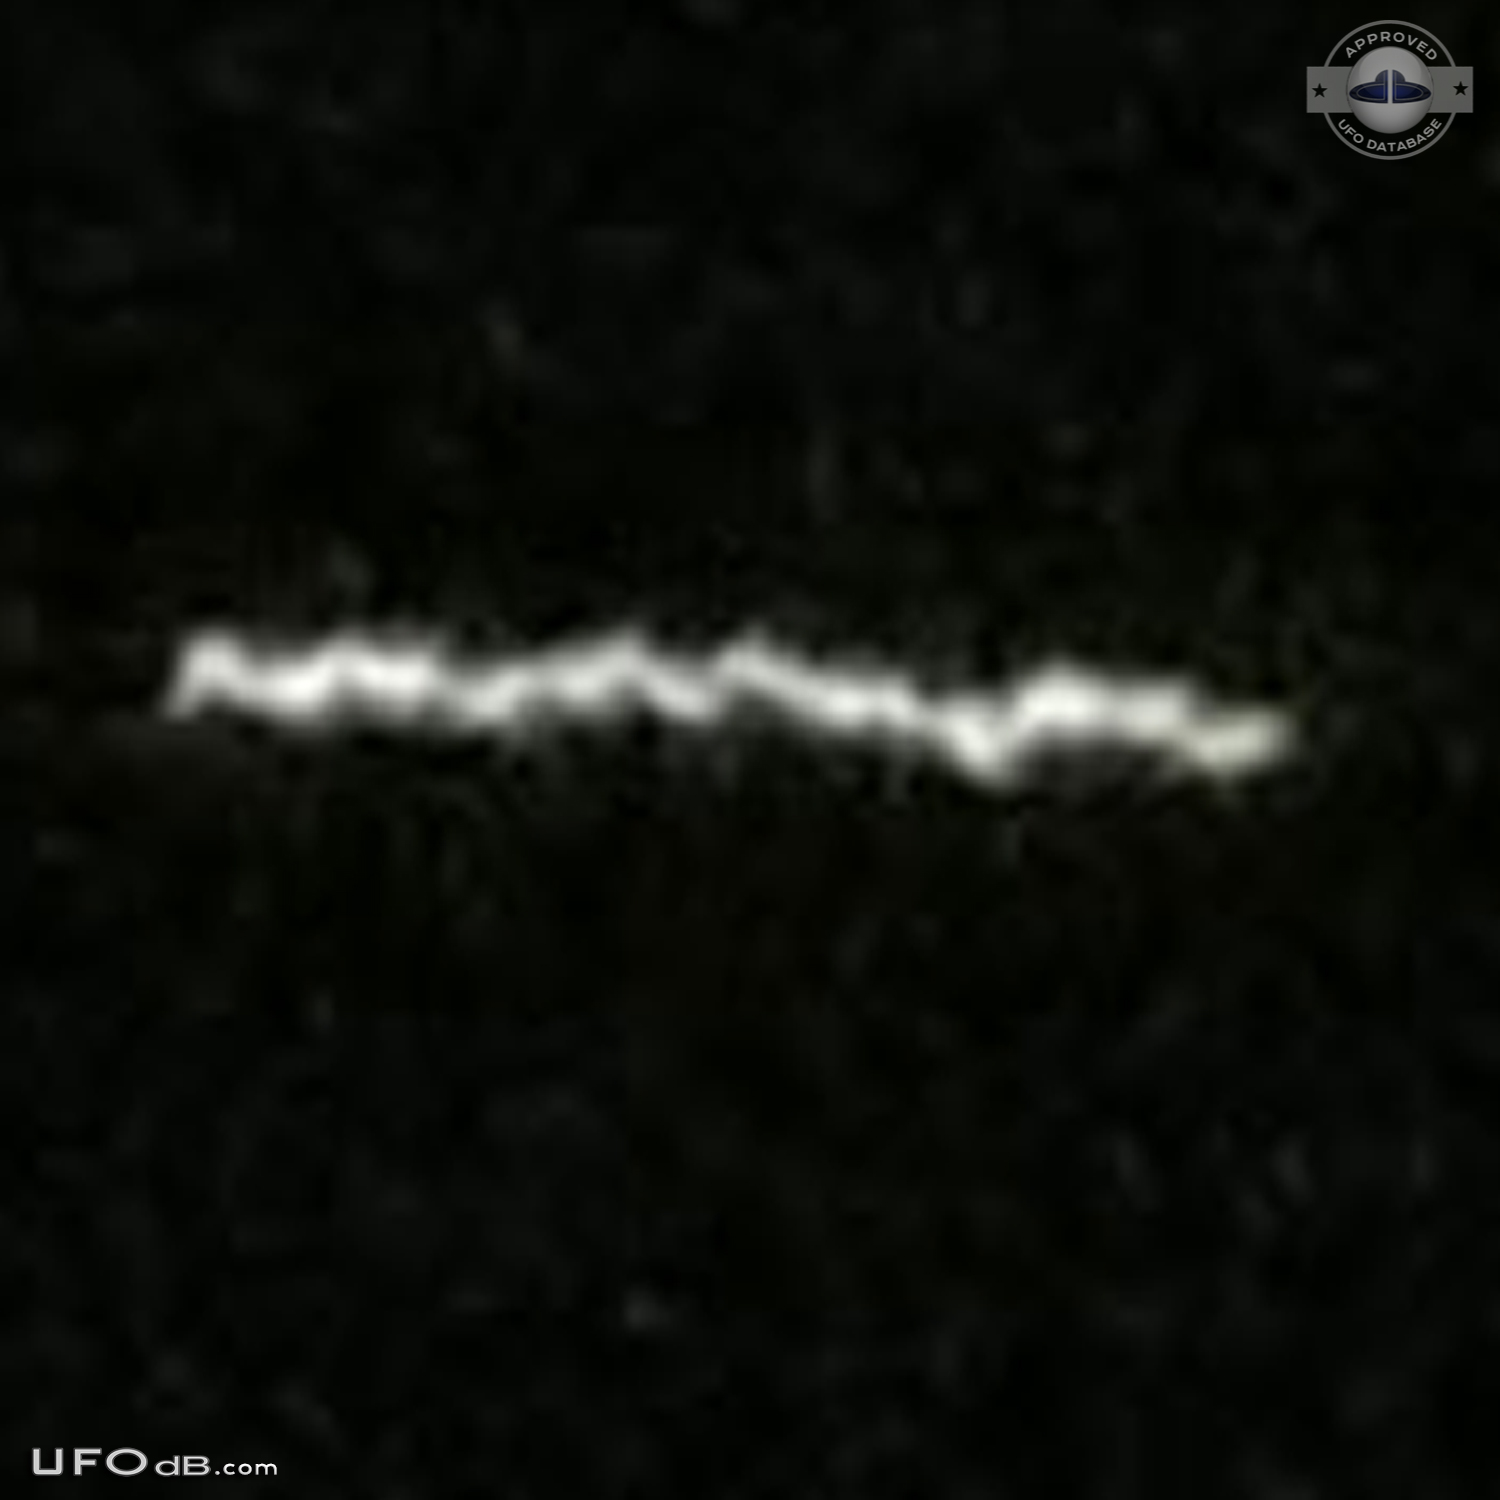 Straight line of white light UFO changing direction over Chichen Itza UFO Picture #635-3